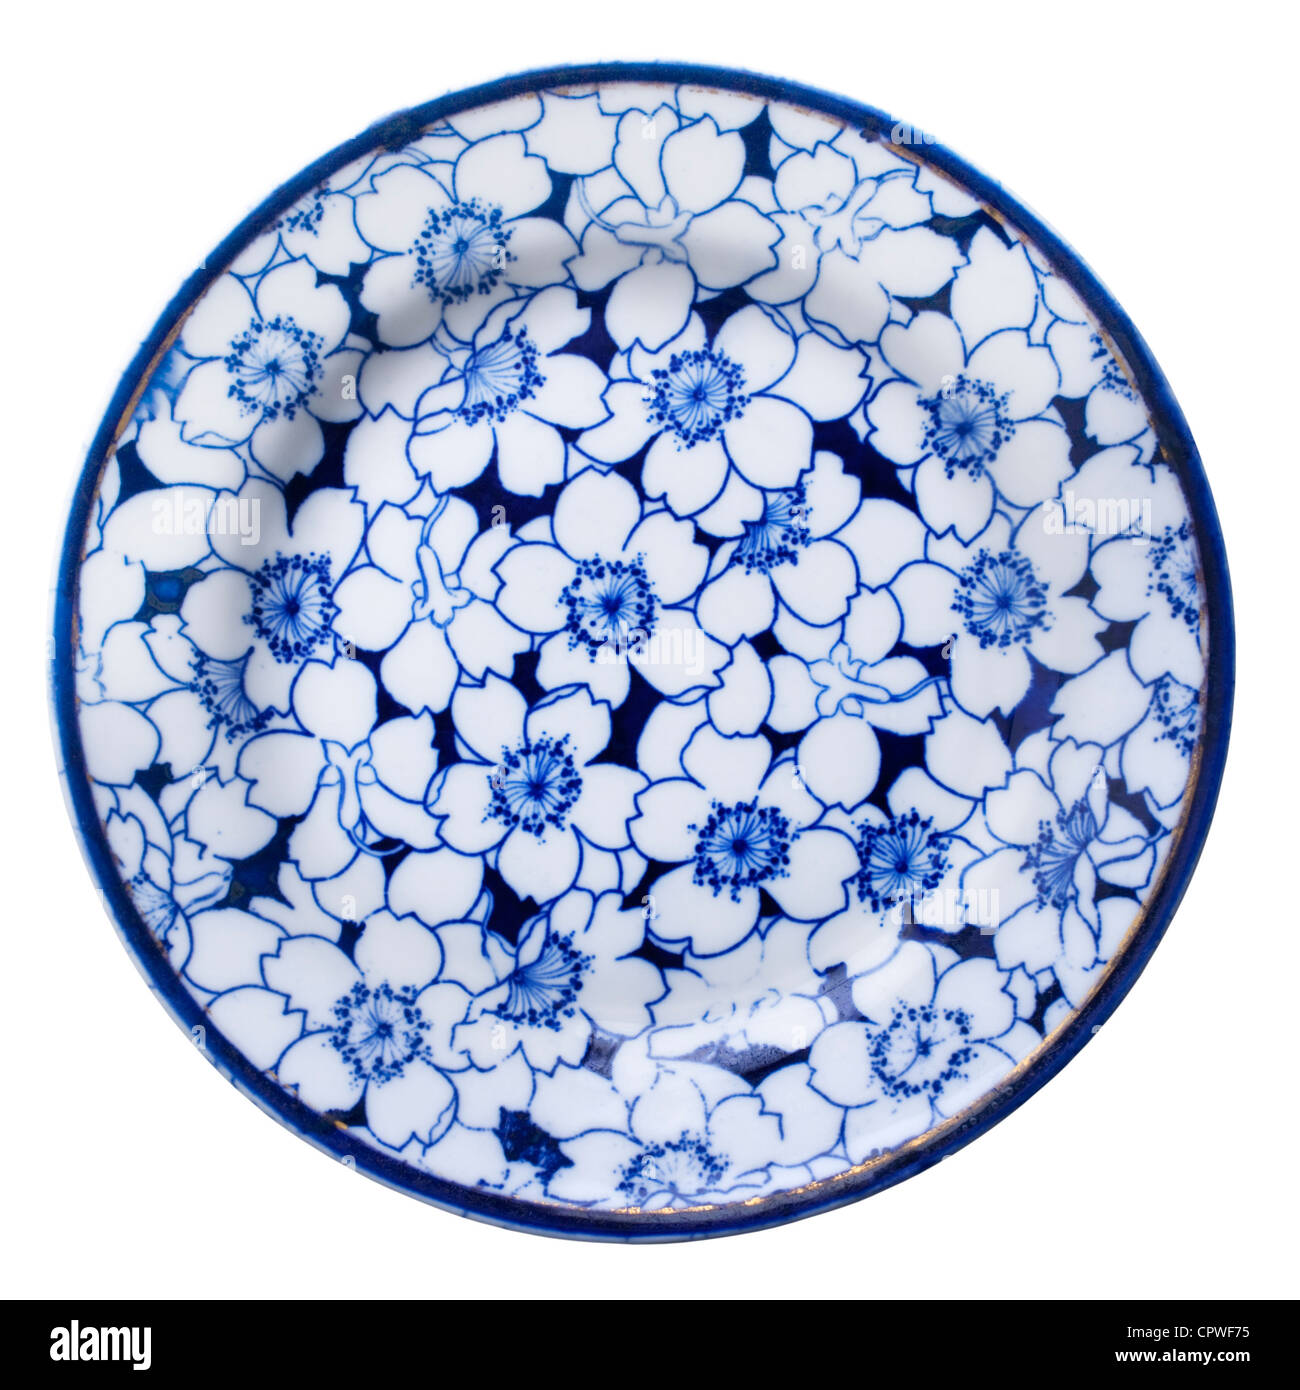 Antique plate with blue and white floral design, isolated on white. Stock Photo